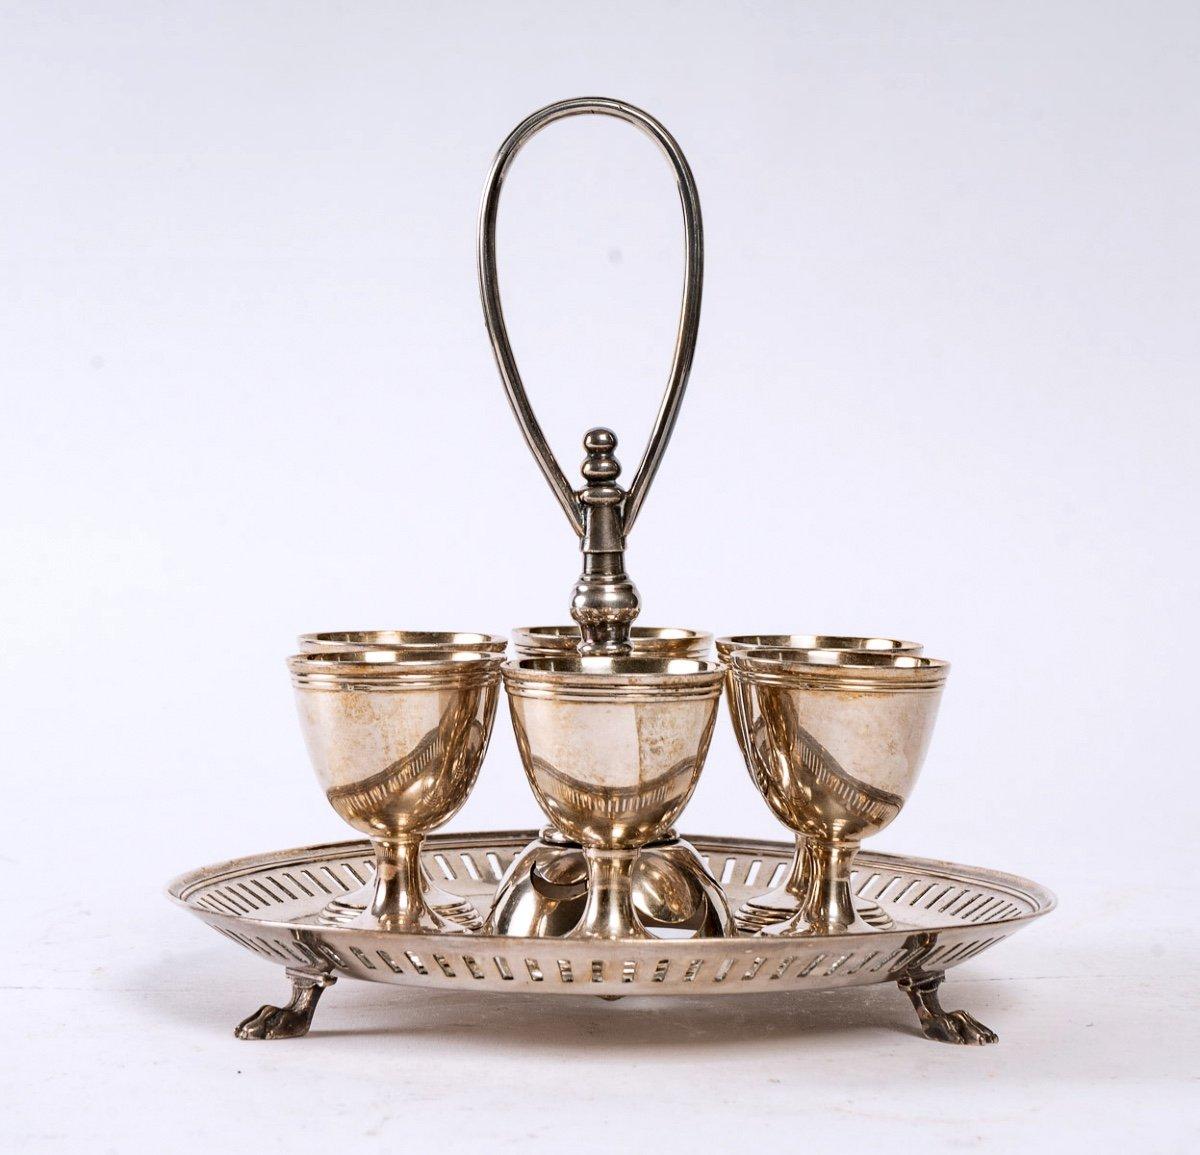 Antique Napoleon III Silver-Plated Egg Stand, by Christofle 1